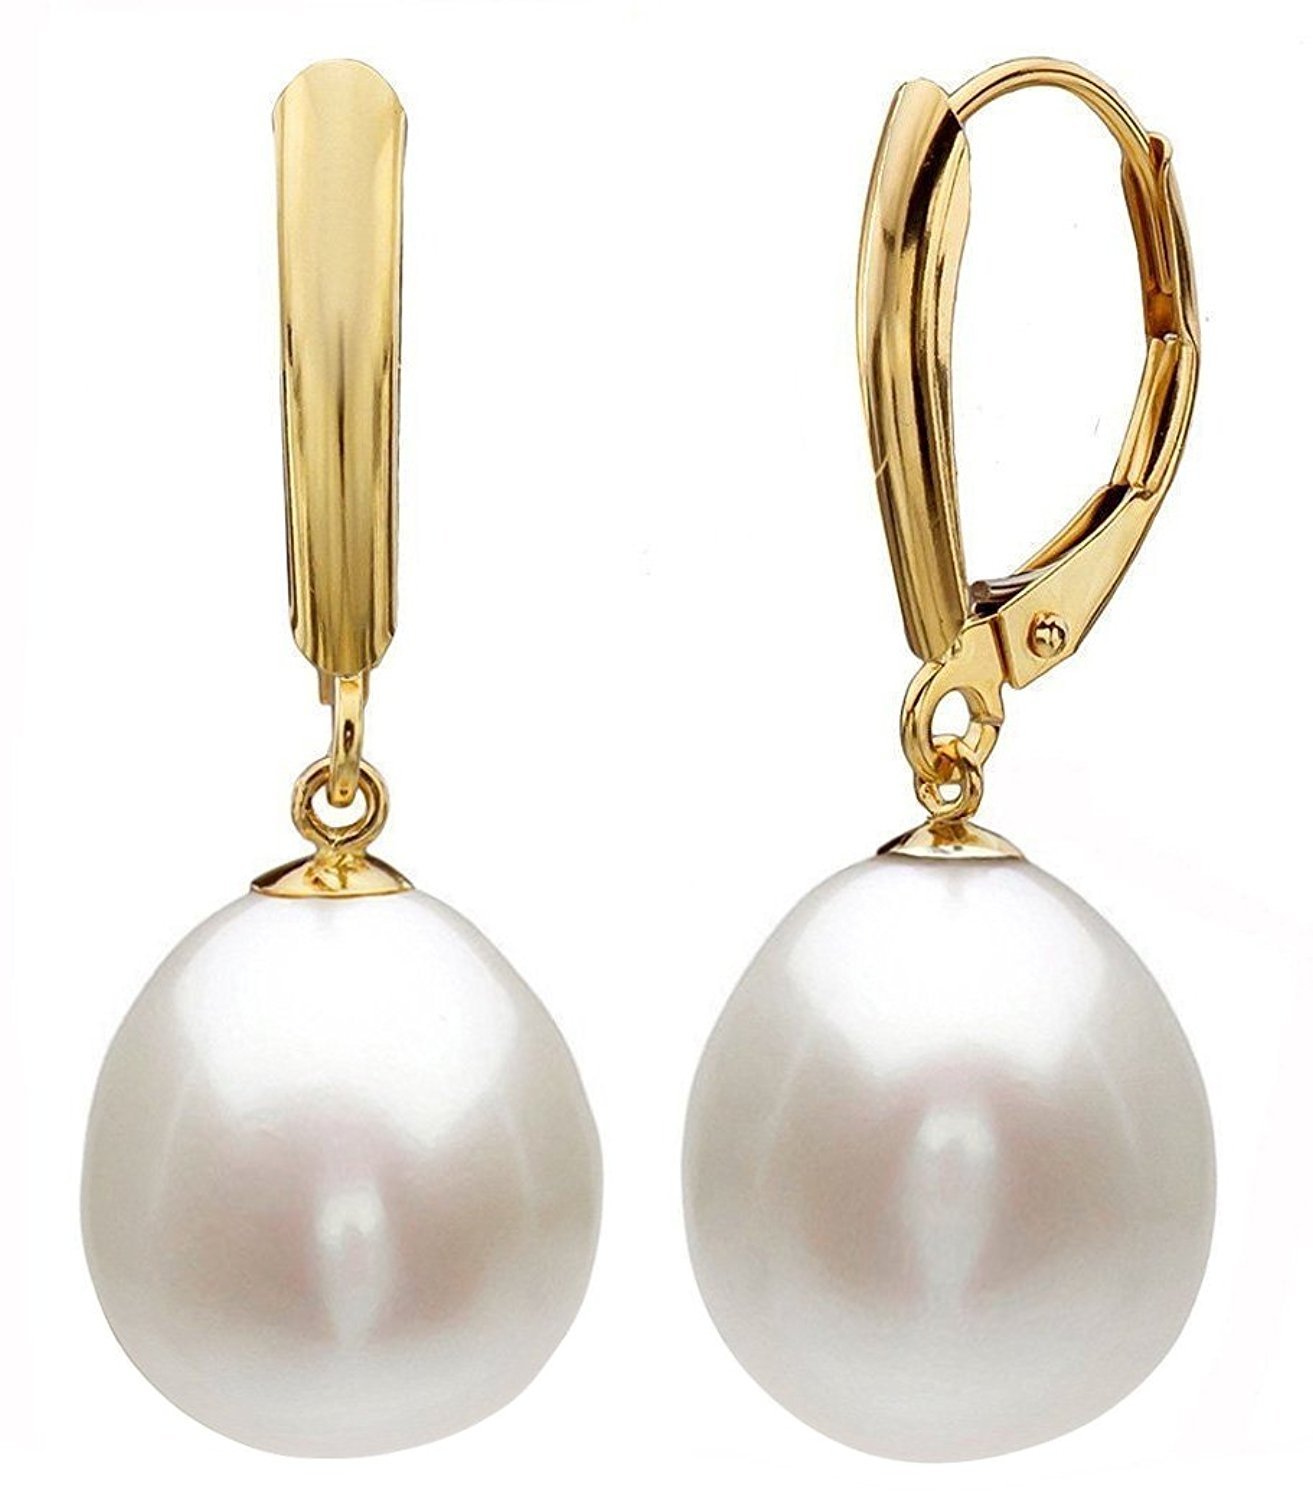 14k Gold Drop Pearl Earrings with Freshwater Cultured Pearls (Leverback